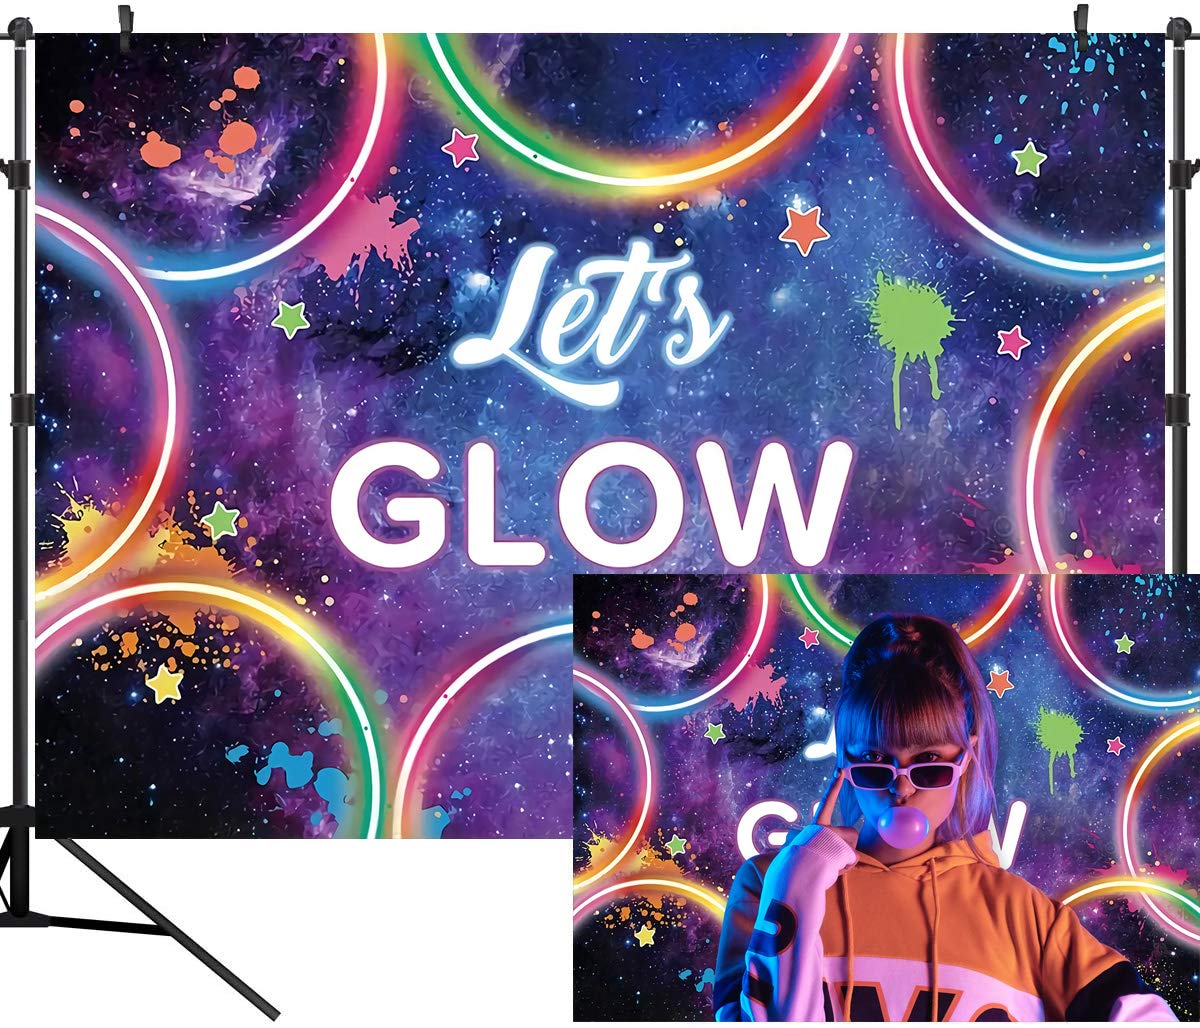 DULUDA 5X3FT Glow Neon Party Backdrop Colorful Laser Ray Splatter Photography Background Graffiti Spray Paint Disco Retro Dance in The Dark Night Birthday Banner Decorations Photo Booth Props BD44F